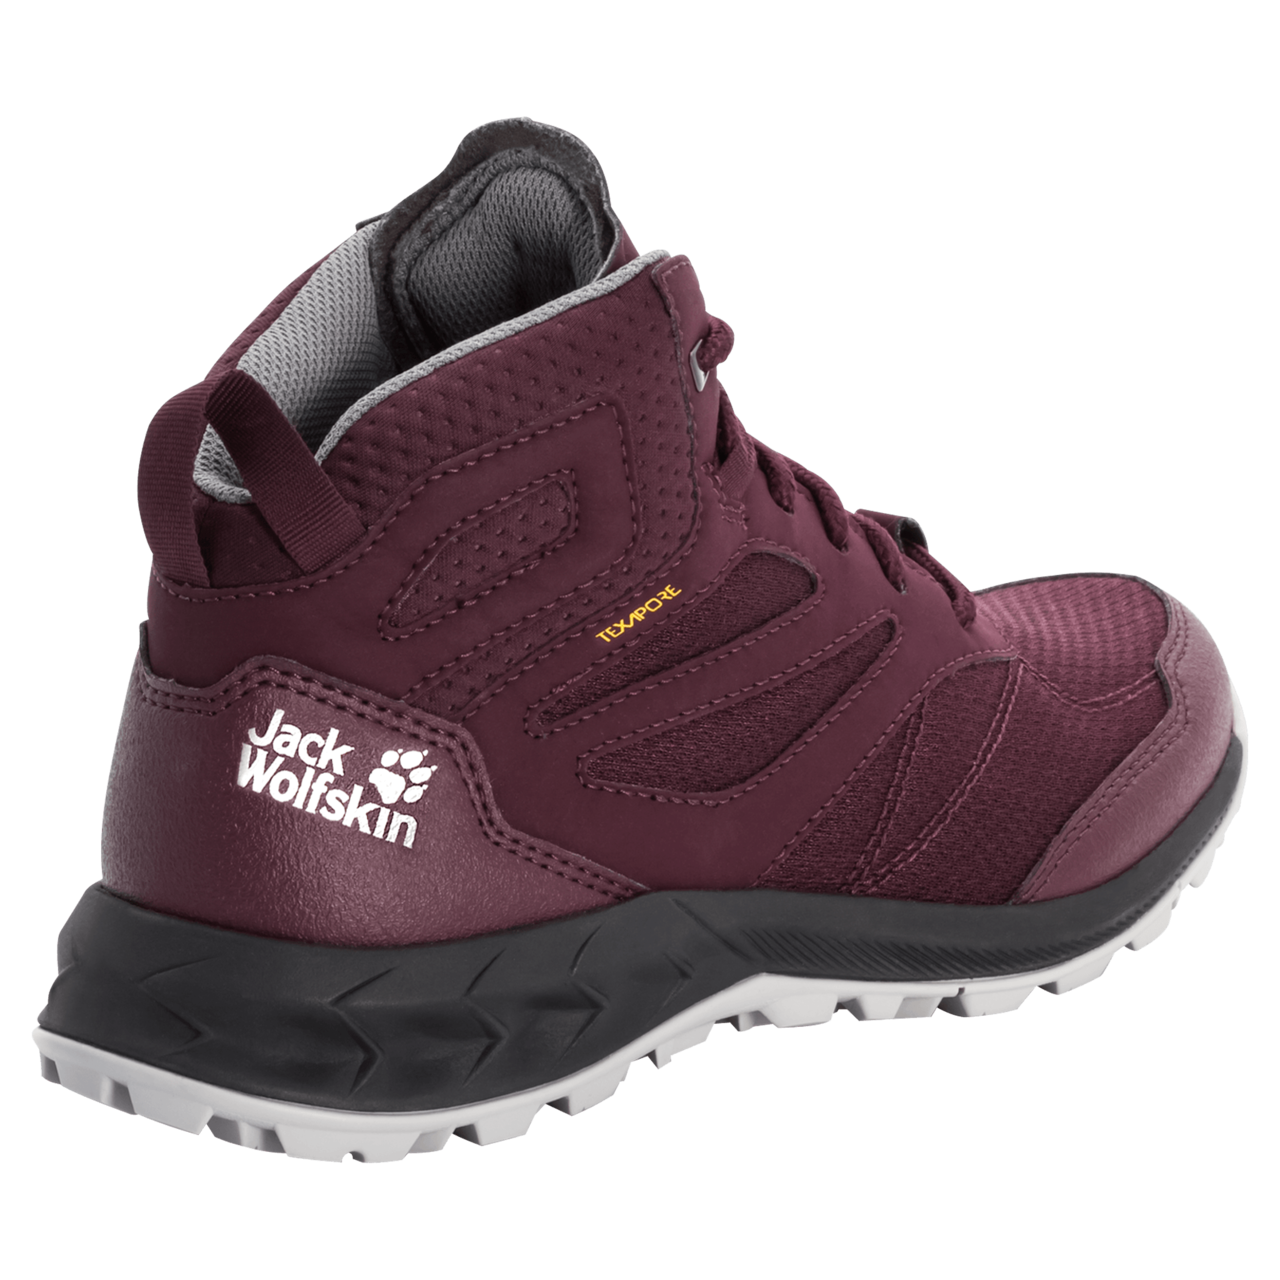 Shop for Jack Wolfskin | Boots | Shoes & Boots | Womens | online at  Lookagain